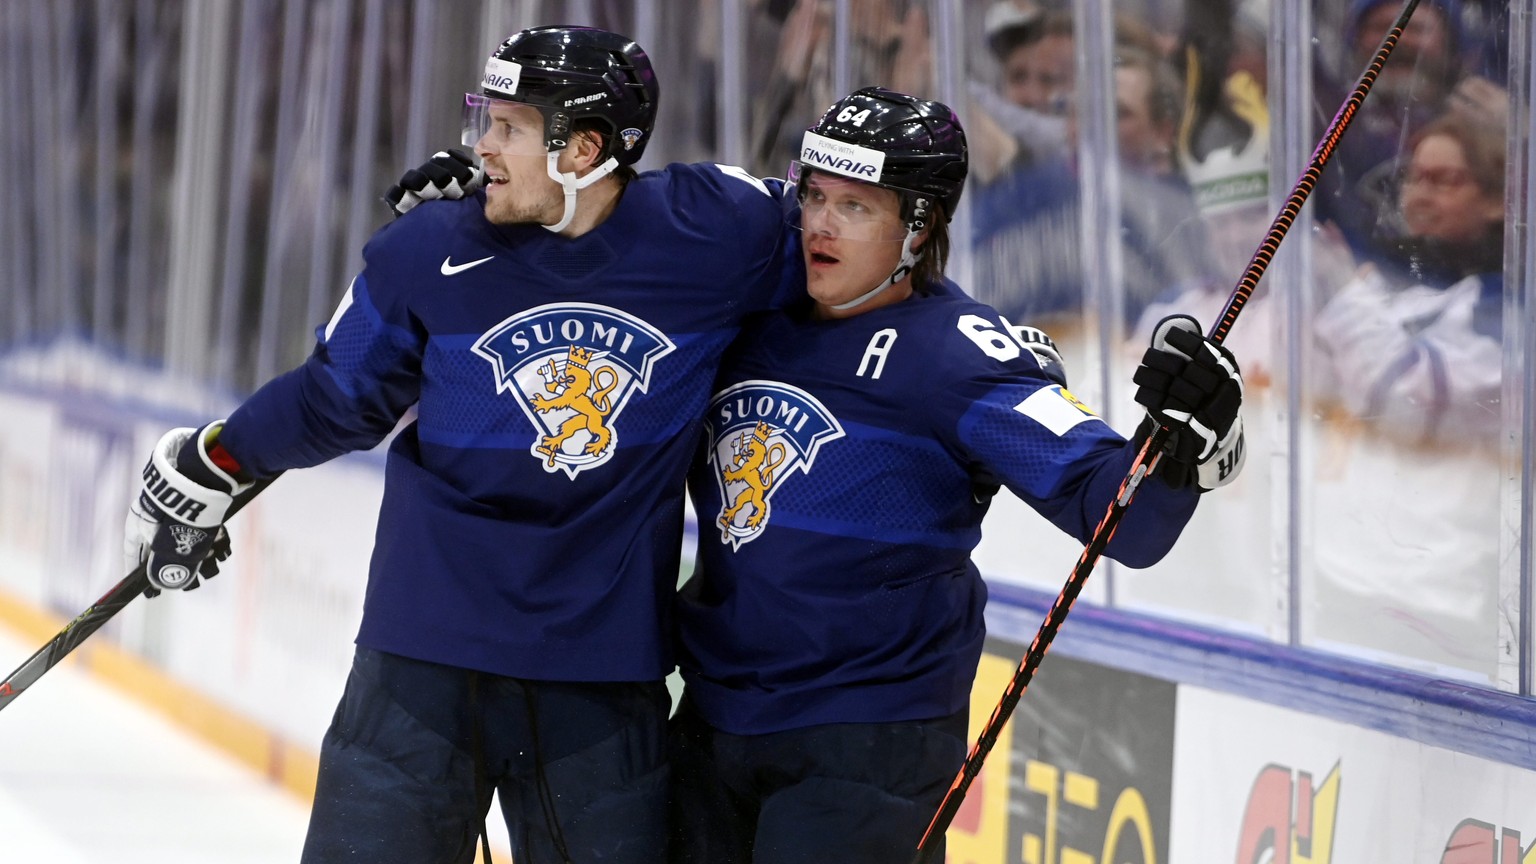 Assist Mikko Lehtonen and goal scorer Mikael Granlund, right, of Finland celebrate their 1-0 powerplay goal during the 2022 IIHF Ice Hockey World Championships preliminary round group B match between  ...